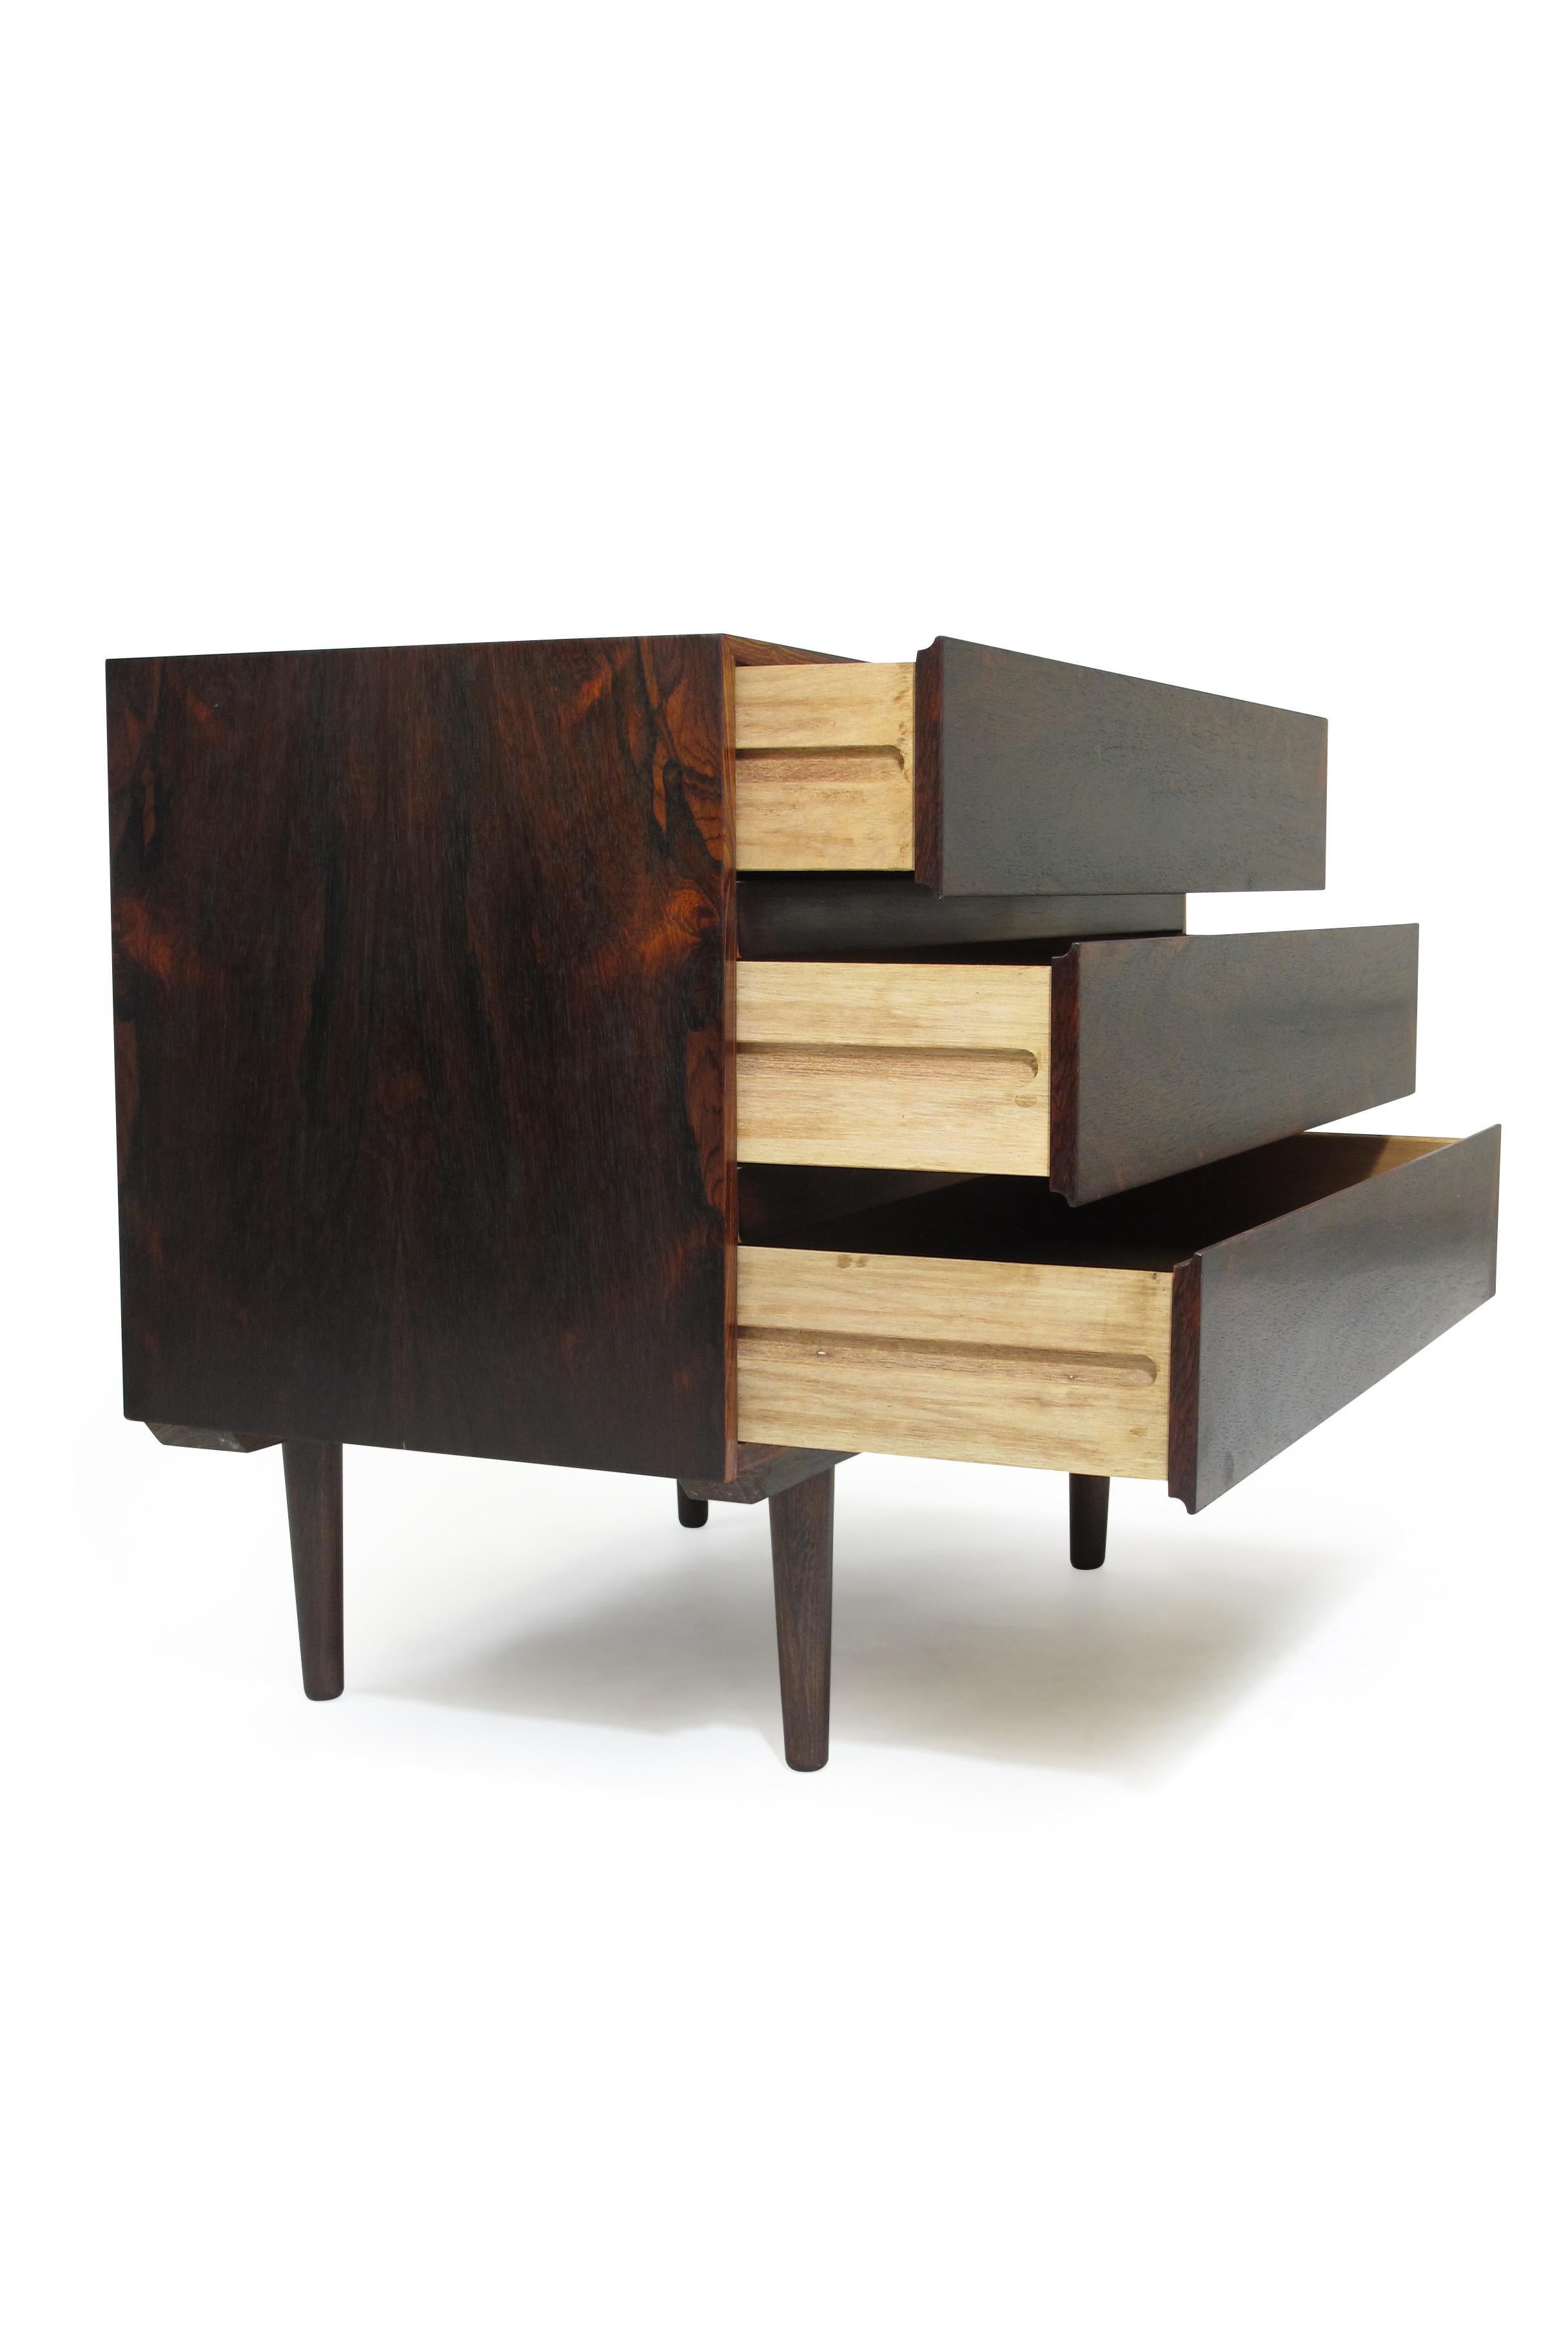 Three-drawer dresser crafted from rich, dark rosewood with bookmatched grain and set on tapered legs. Finely restored.